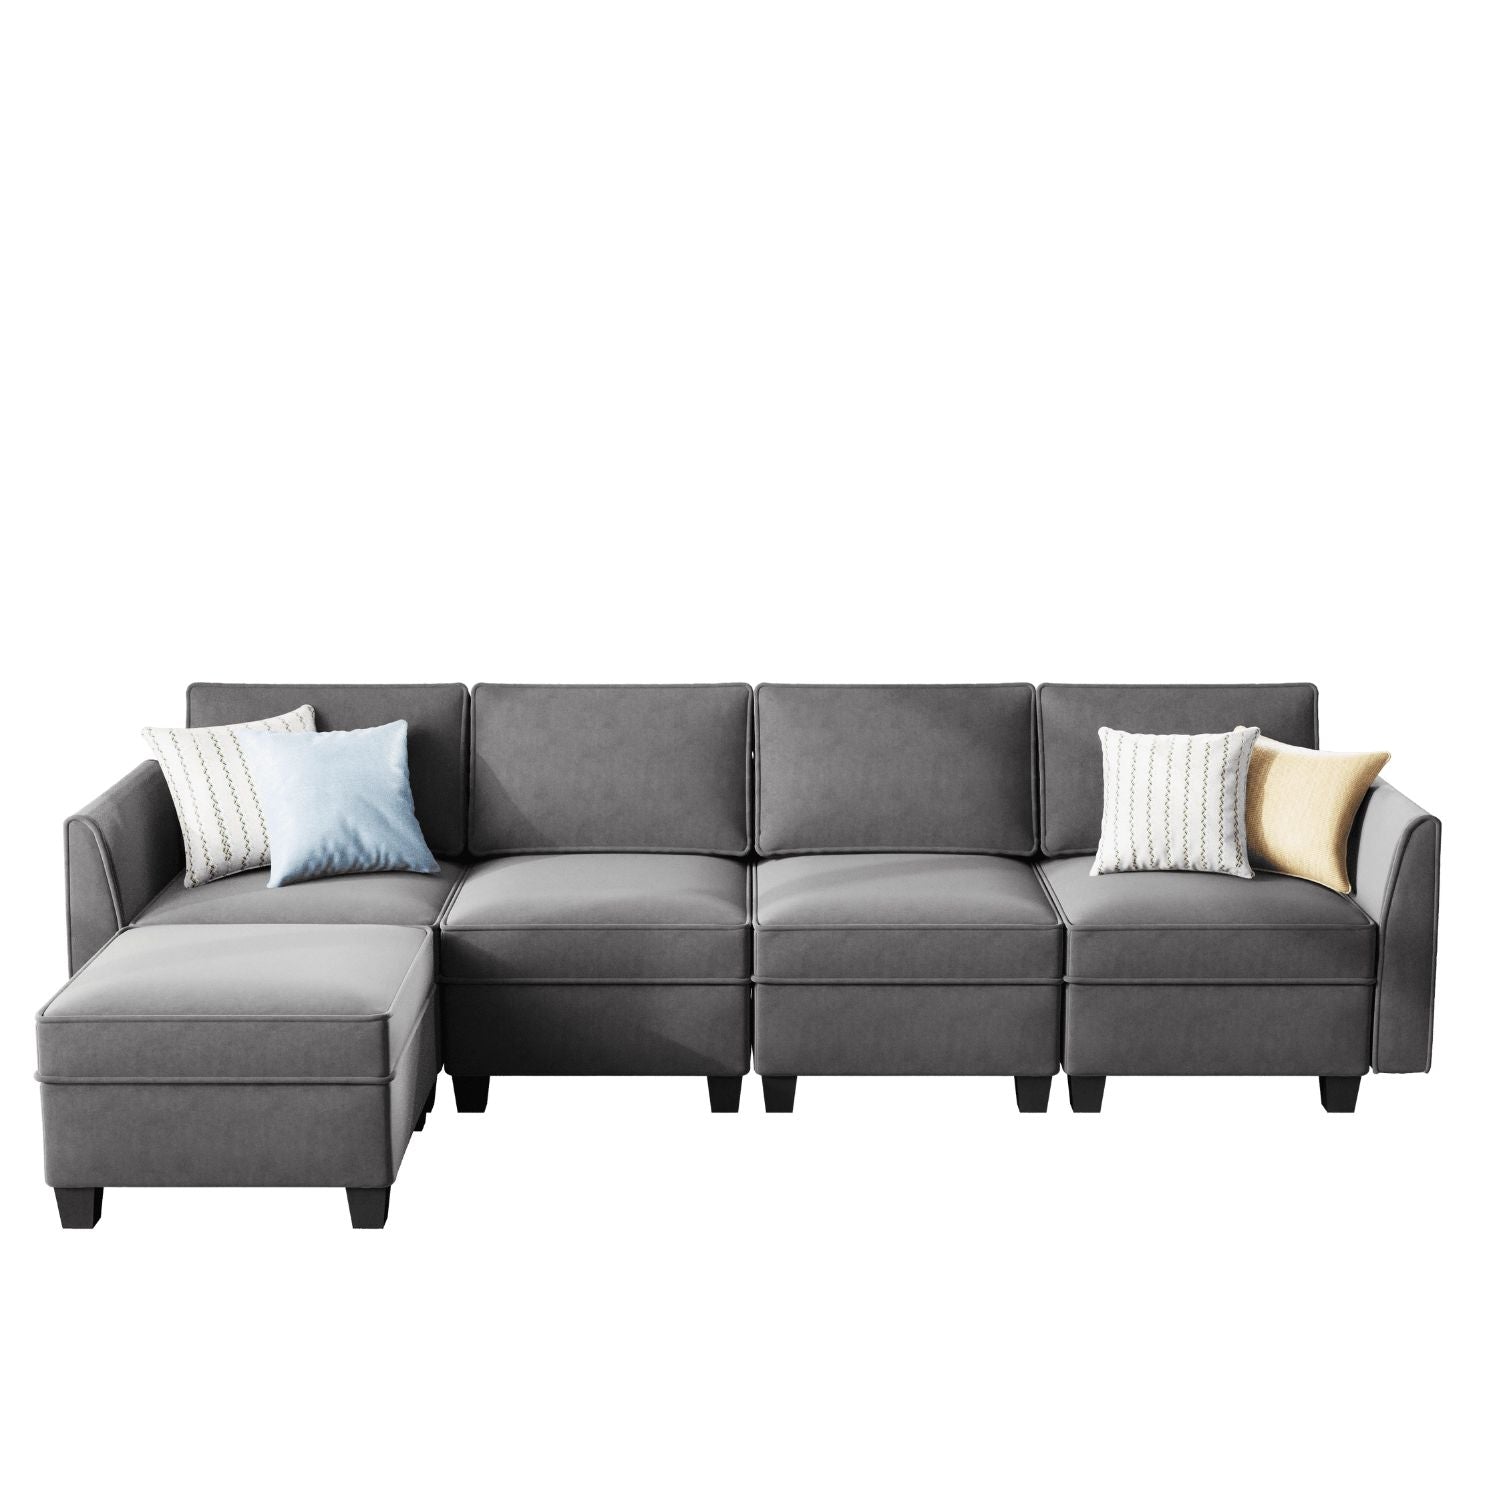 Caleb Modular Velvet Sectional Sofa Couch with Storage and Chaise